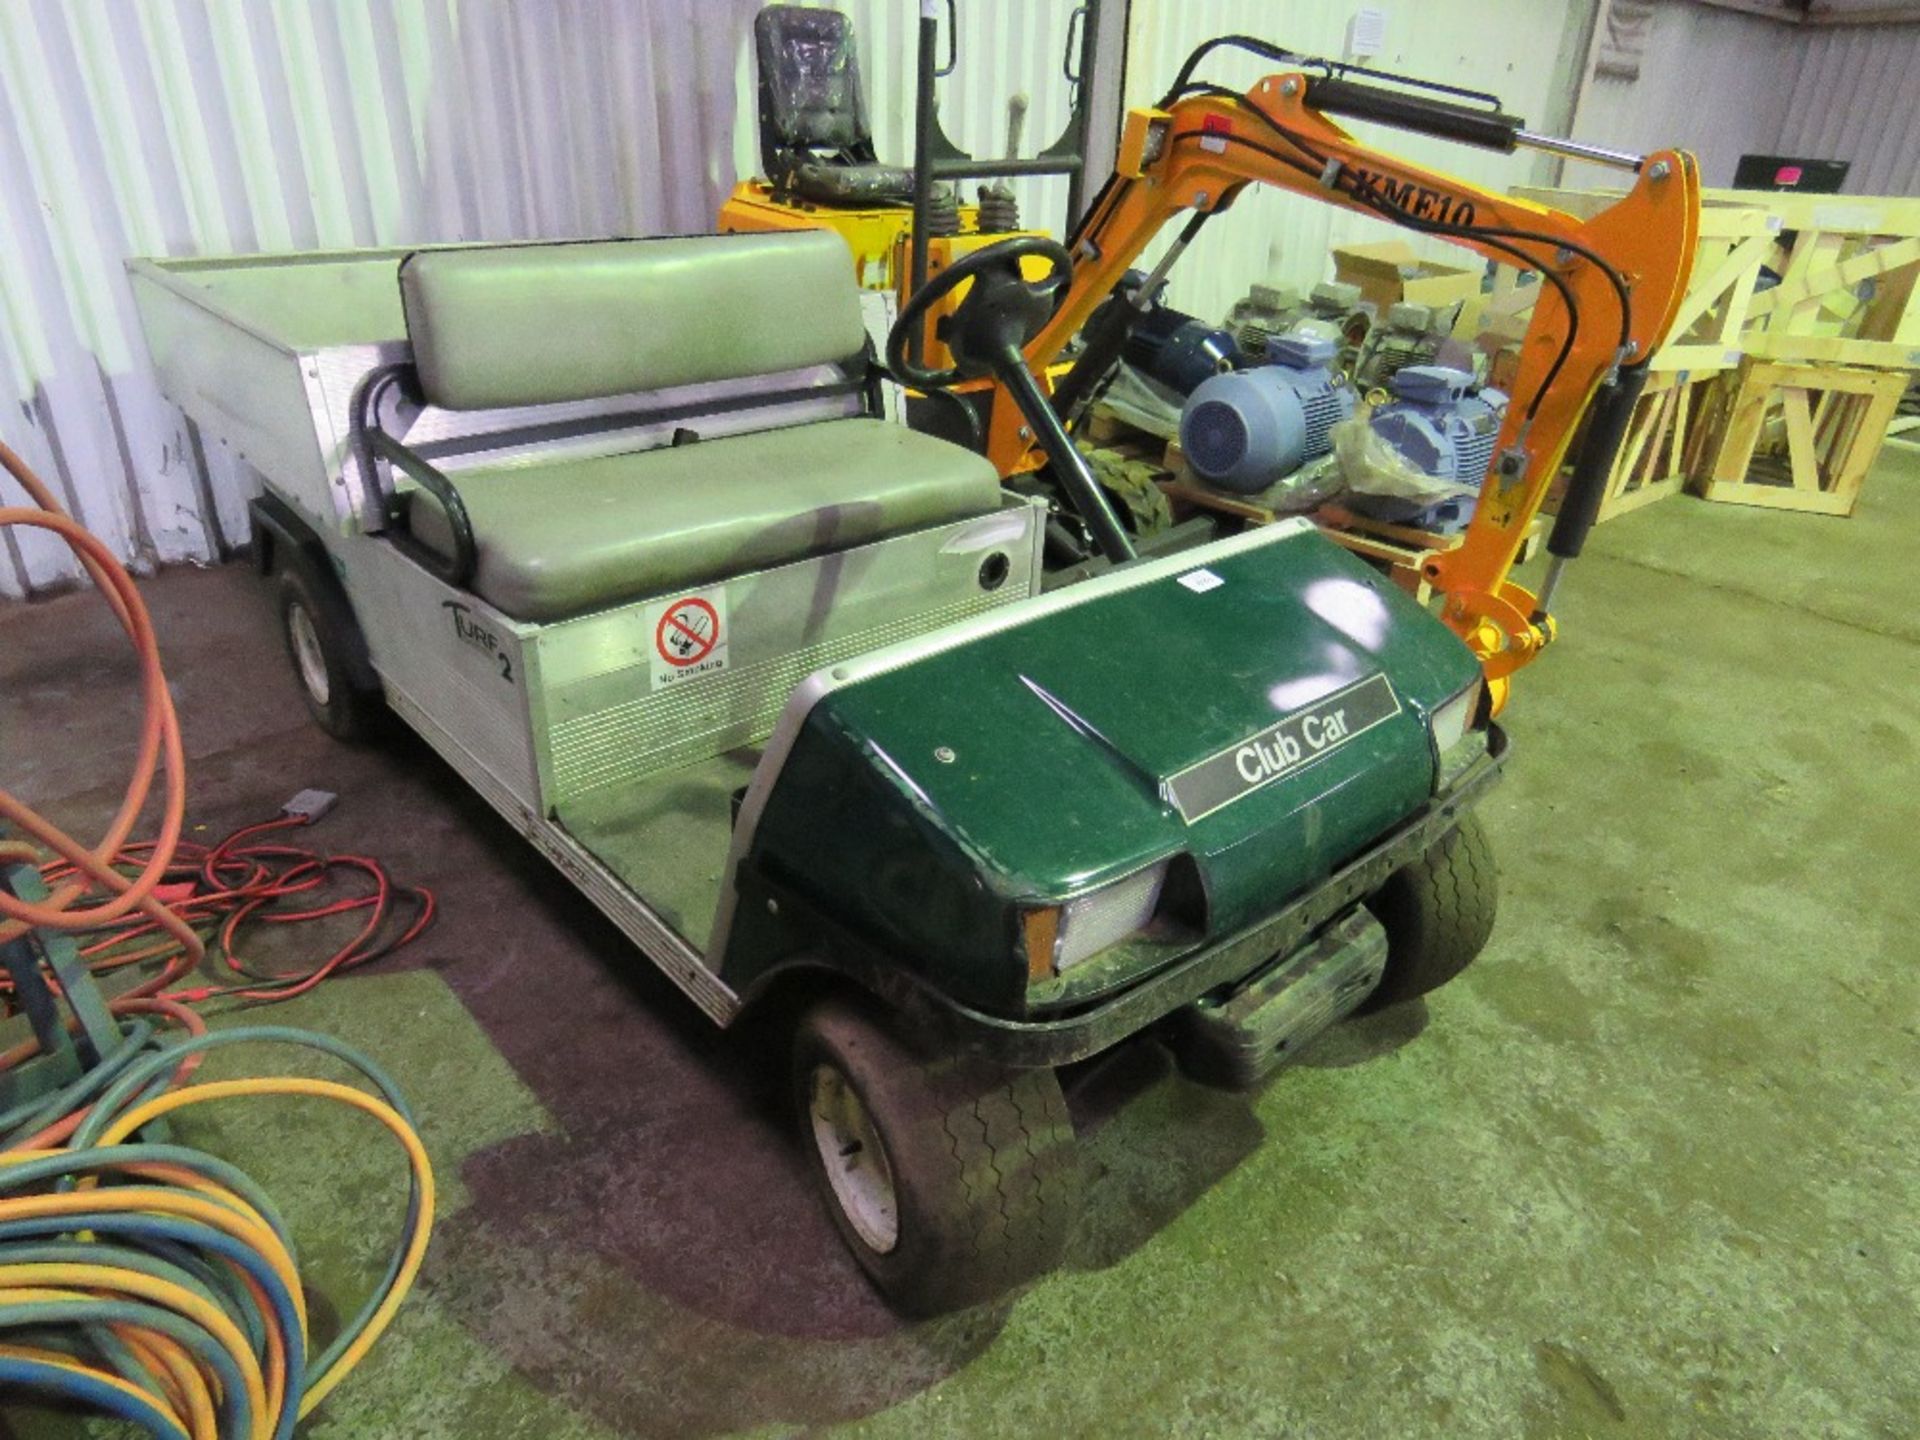 CLUBCAR BATTERY POWERED BUGGY WITH CHARGER. WHEN TESTED WAS SEEN TO RUN AND DRIVE.